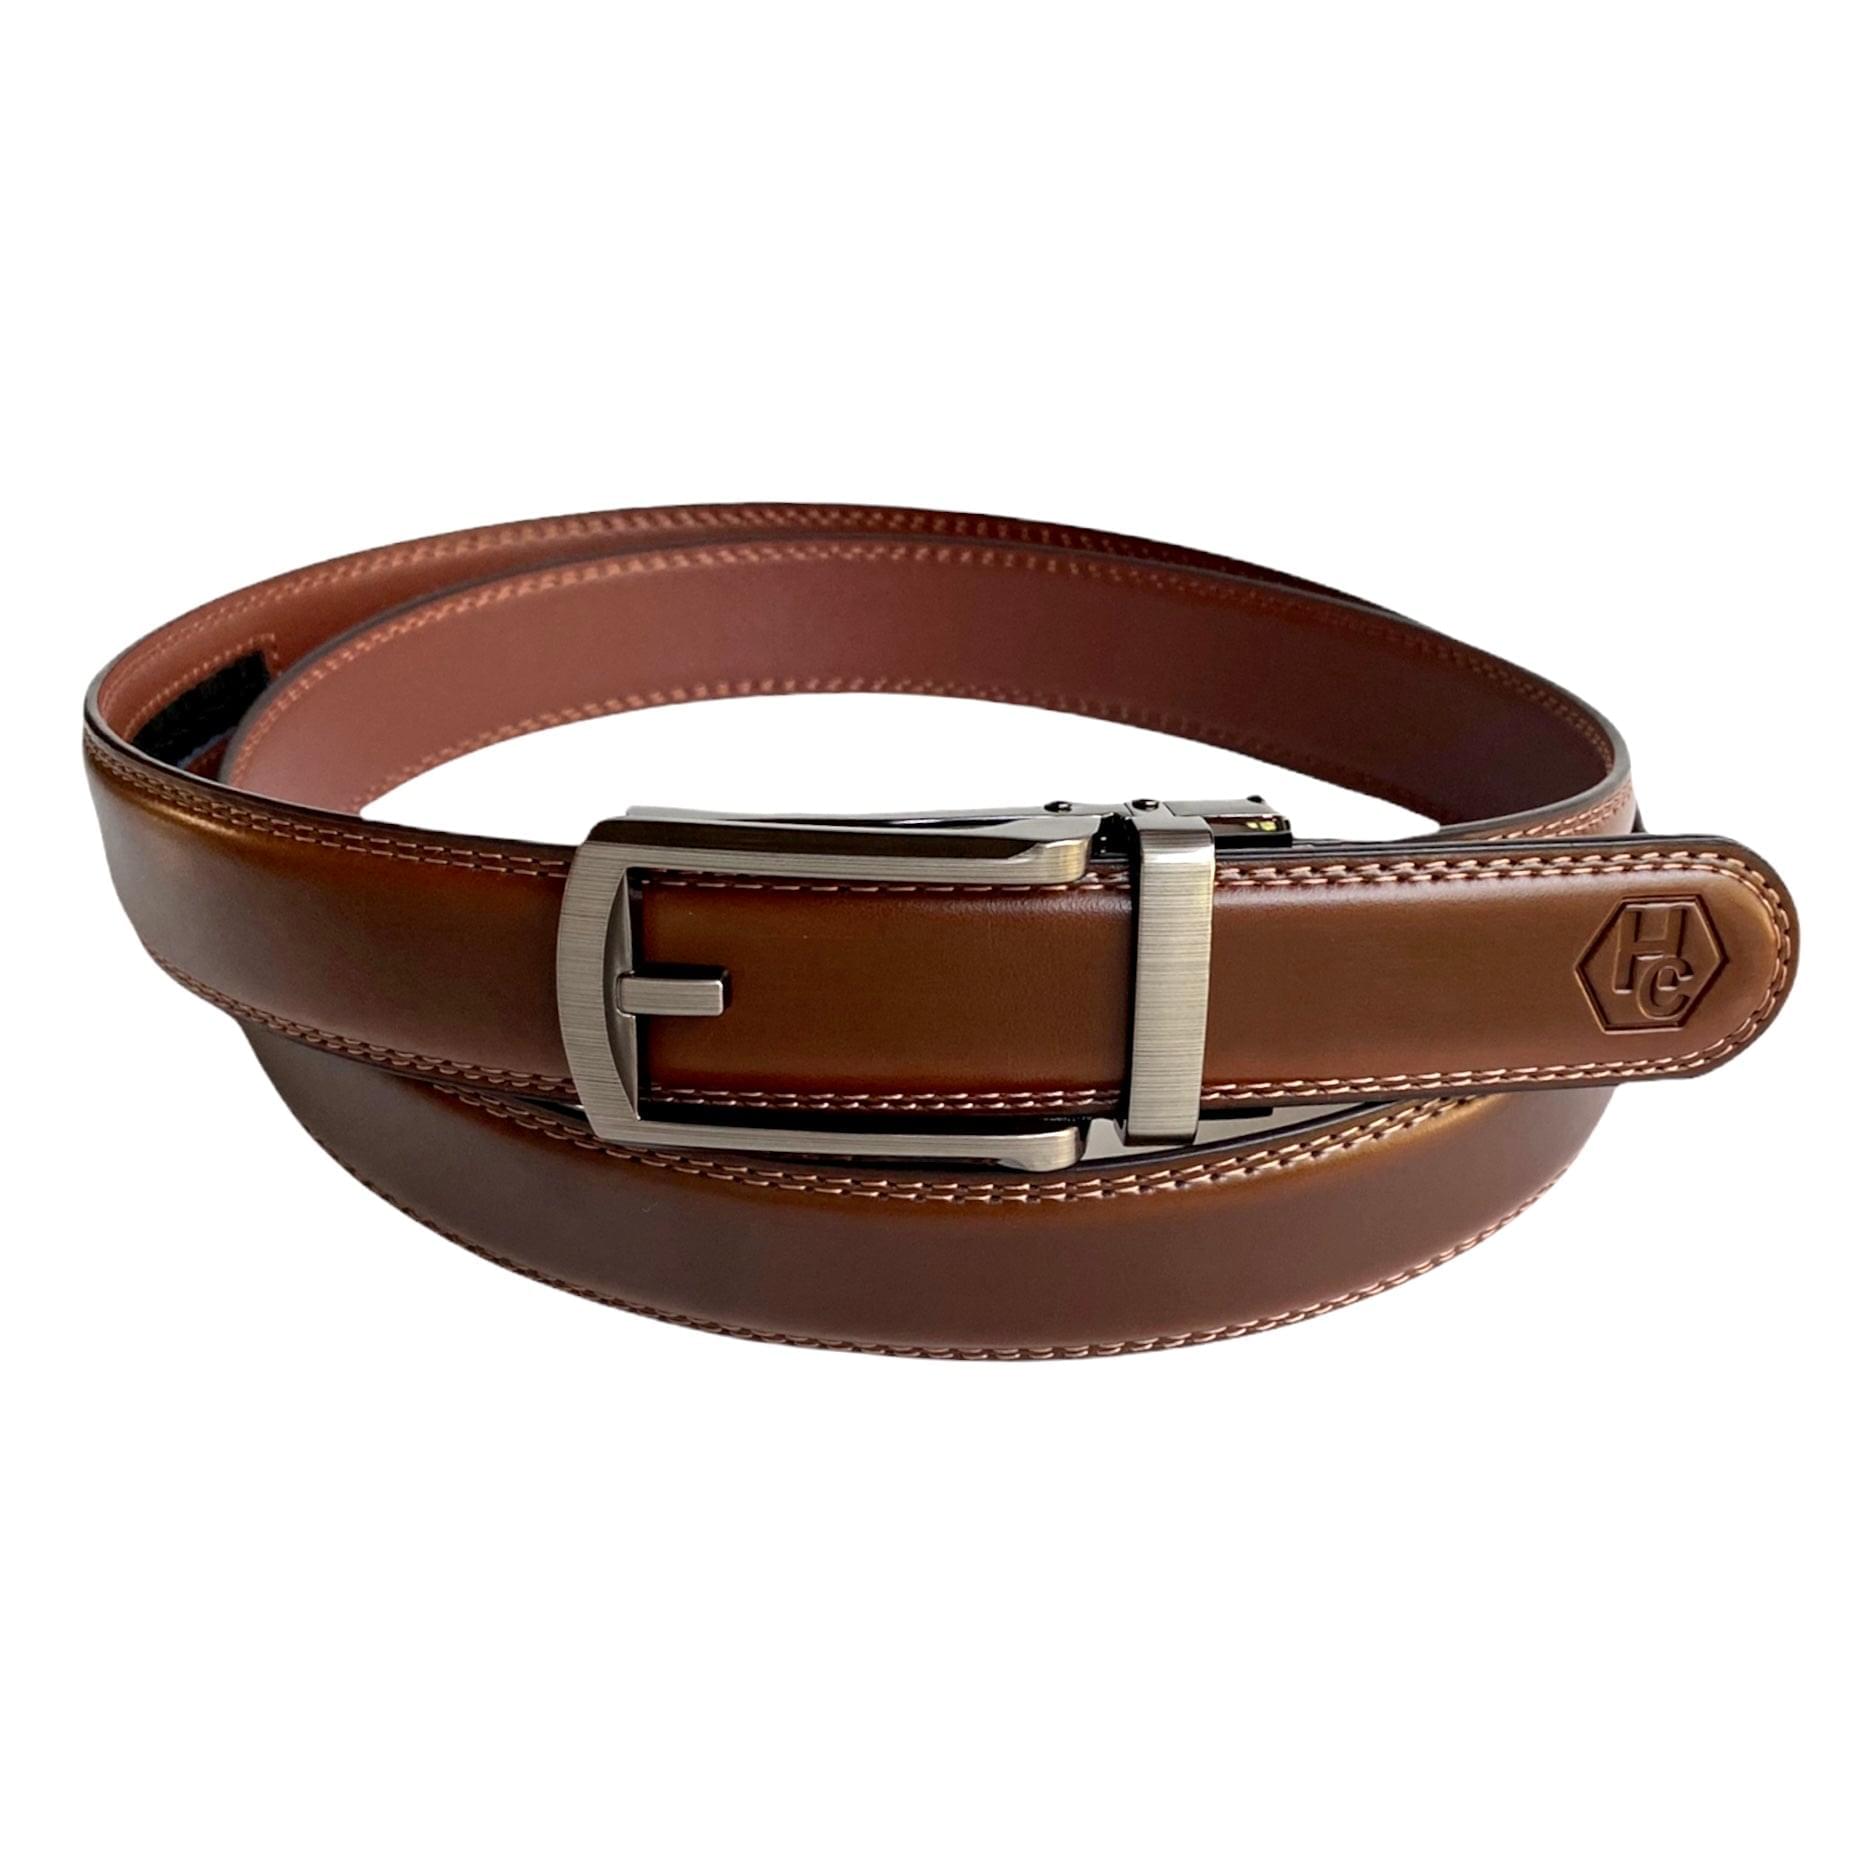 1.15" Genuine Leather Brown Strap And 1.15" Automatic Buckle "Wet Asphalt" Hollow 31837641539735